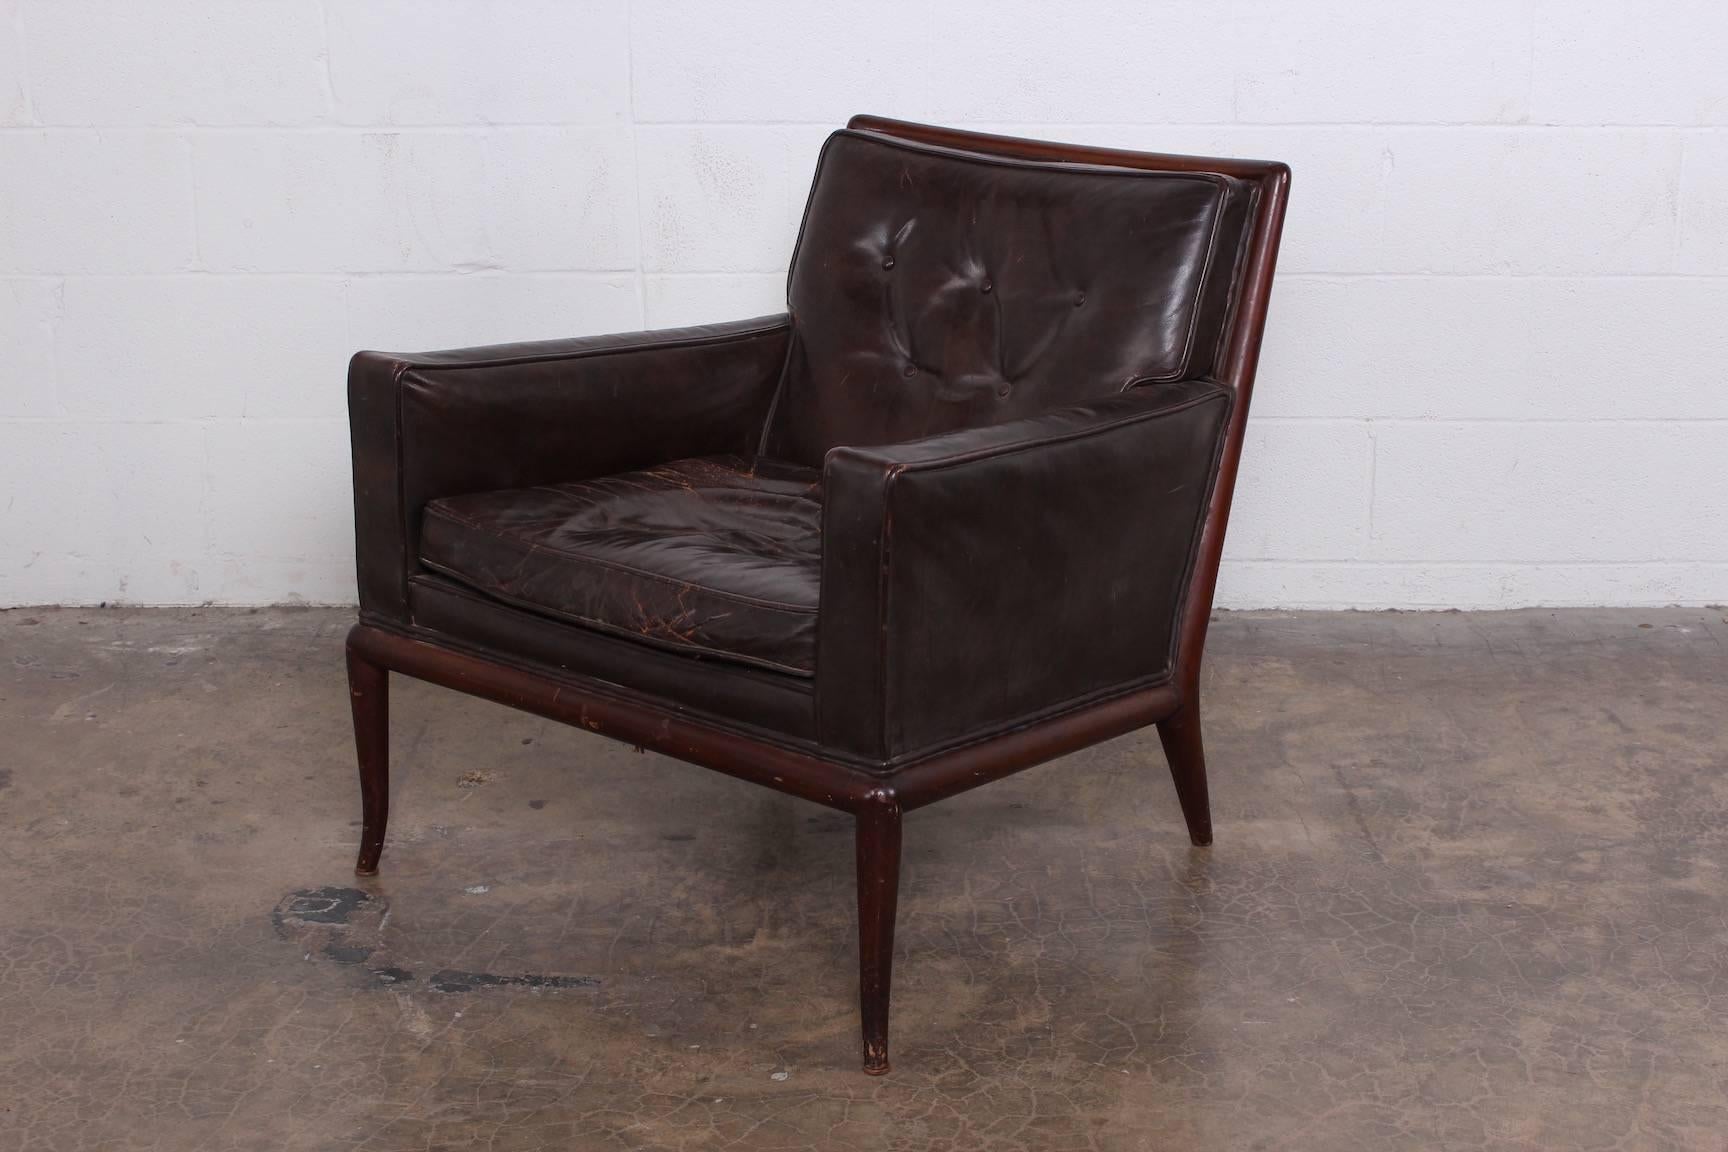 An iconic lounge chair by T.H. Robsjohn-Gibbings for Widdicomb in original, beautifully patinated brown leather.